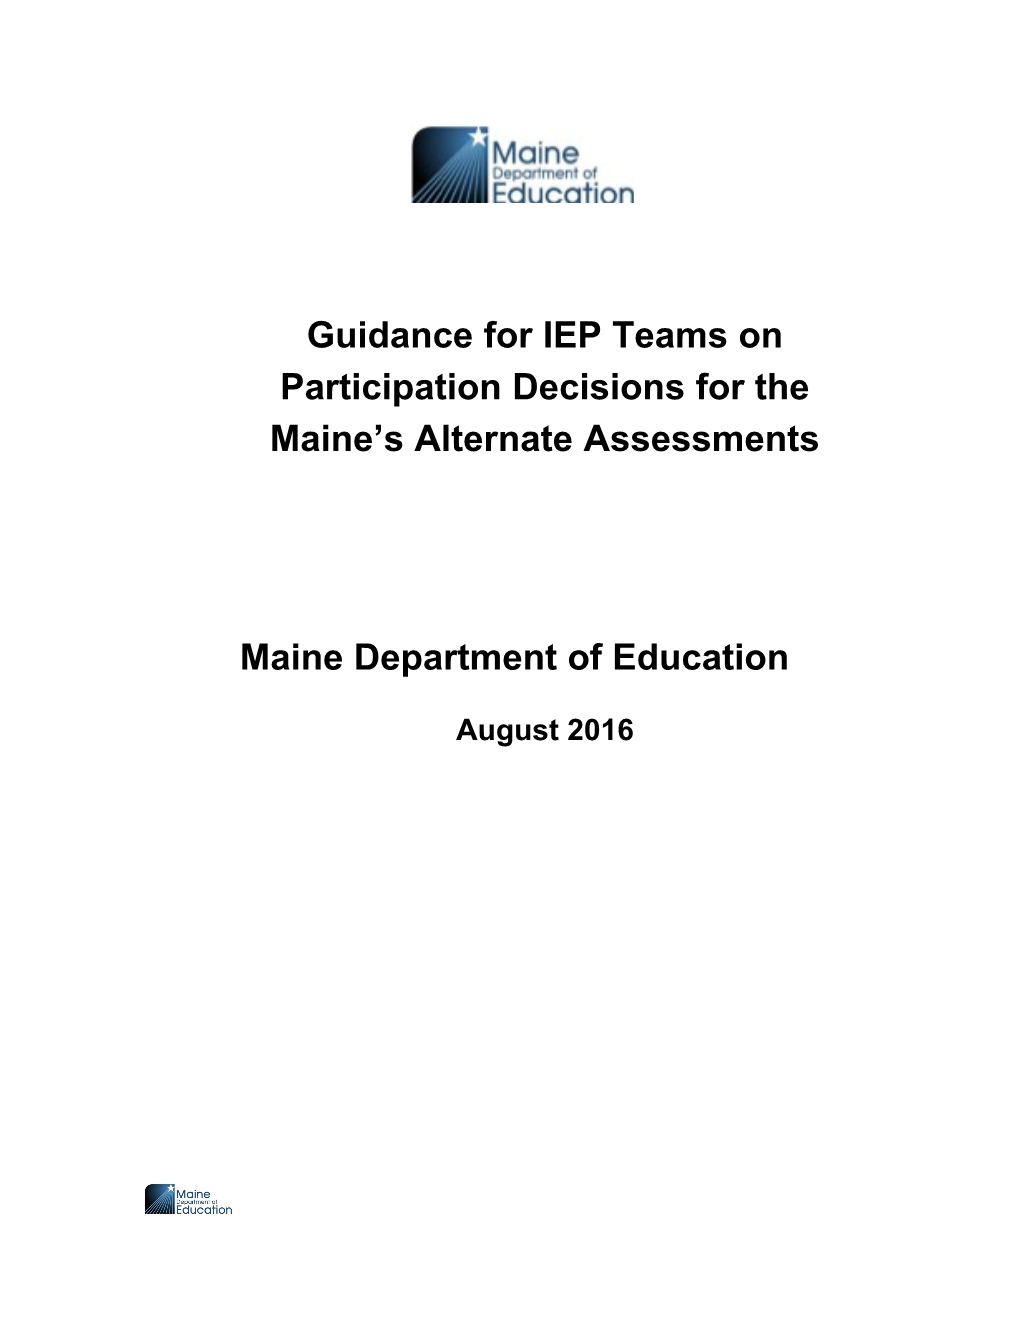 Guidance for IEP Teams on Participation Decisions for the Maine S Alternate Assessments